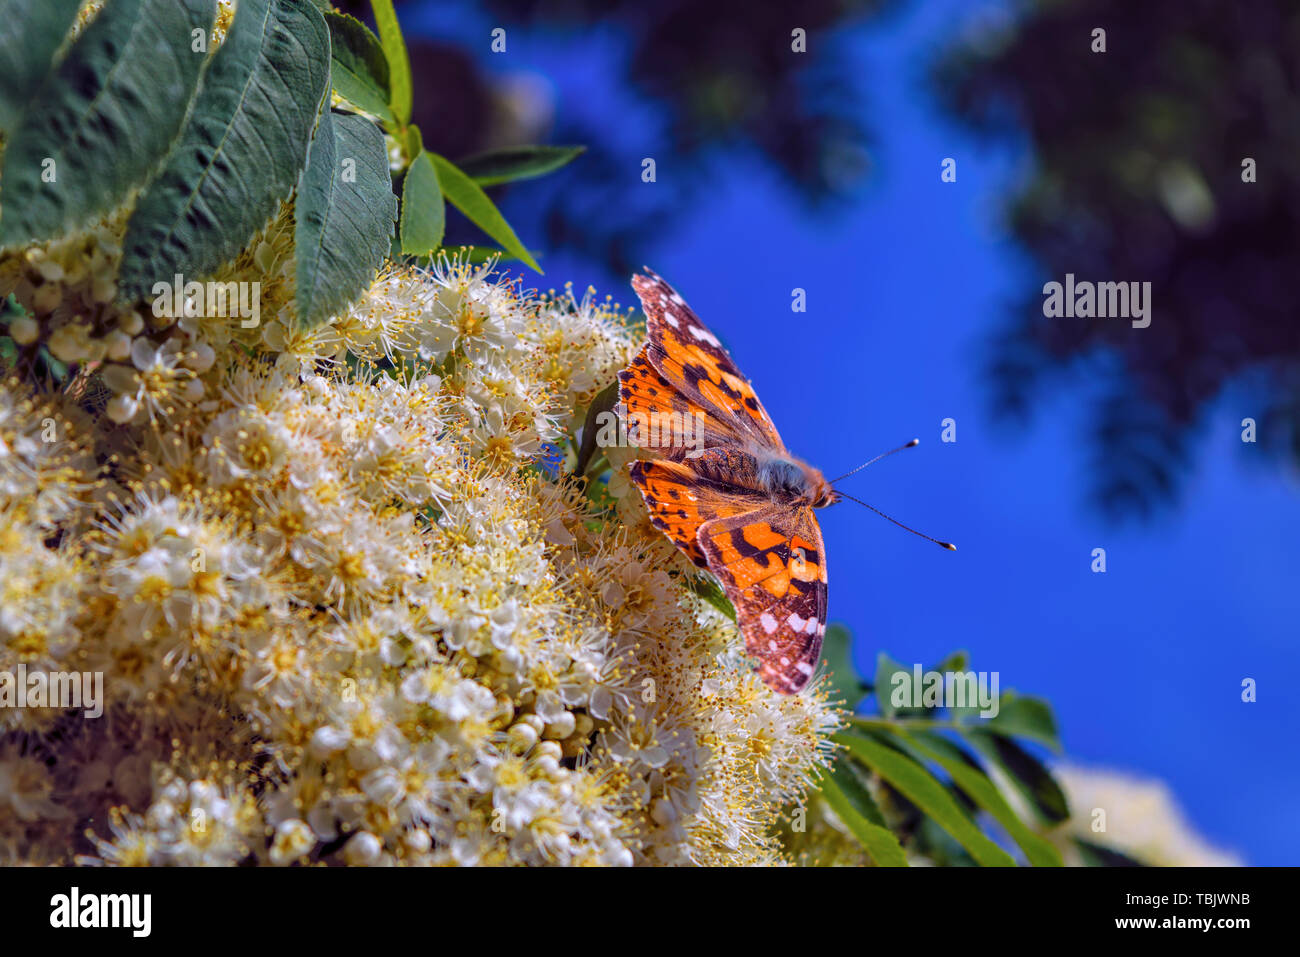 A butterfly on a blossoming rowan branch close-up. Butterfly of the family Nymphalidae. Stock Photo